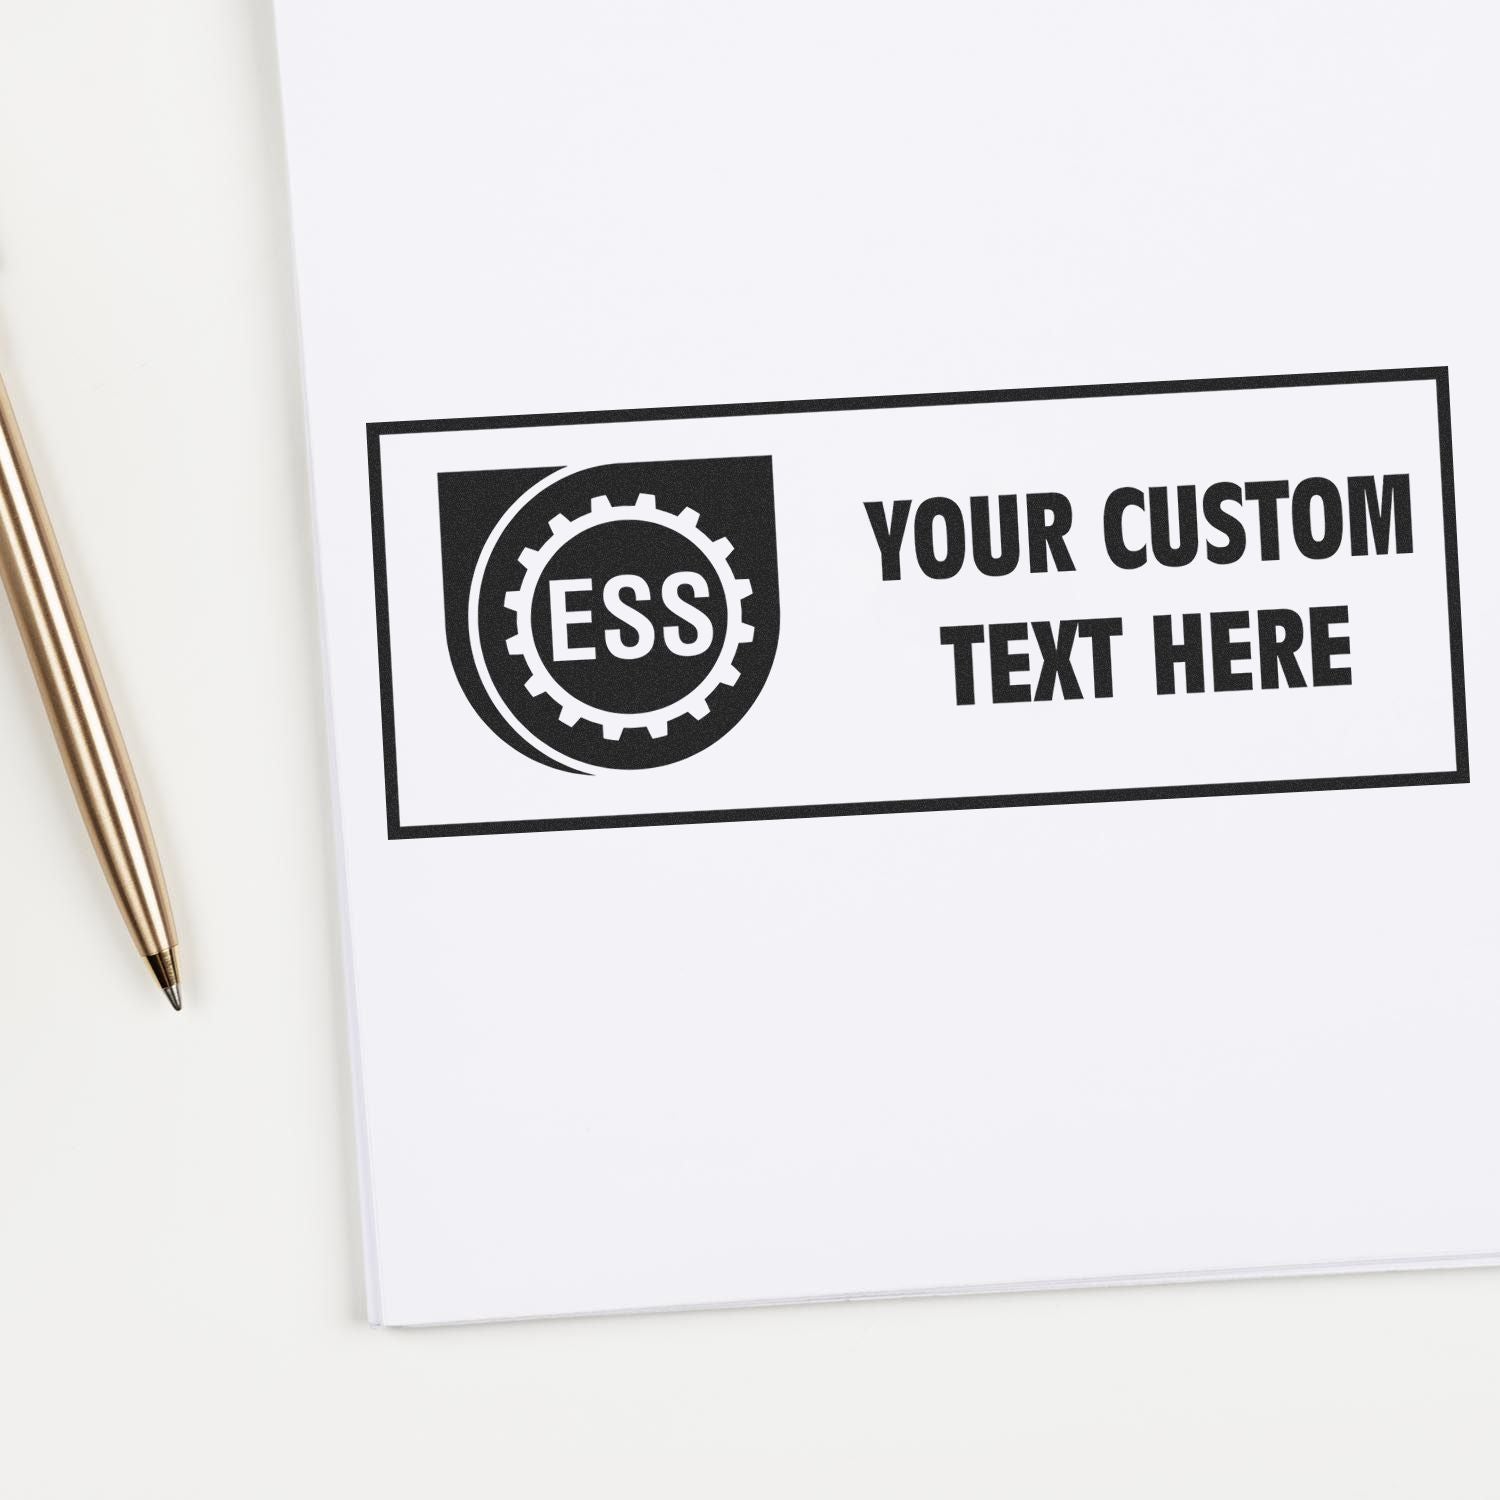  Personalized Self-Inking Signature Stamps - Custom Signature  Stamp, Great for Documents and Other Official Paperwork